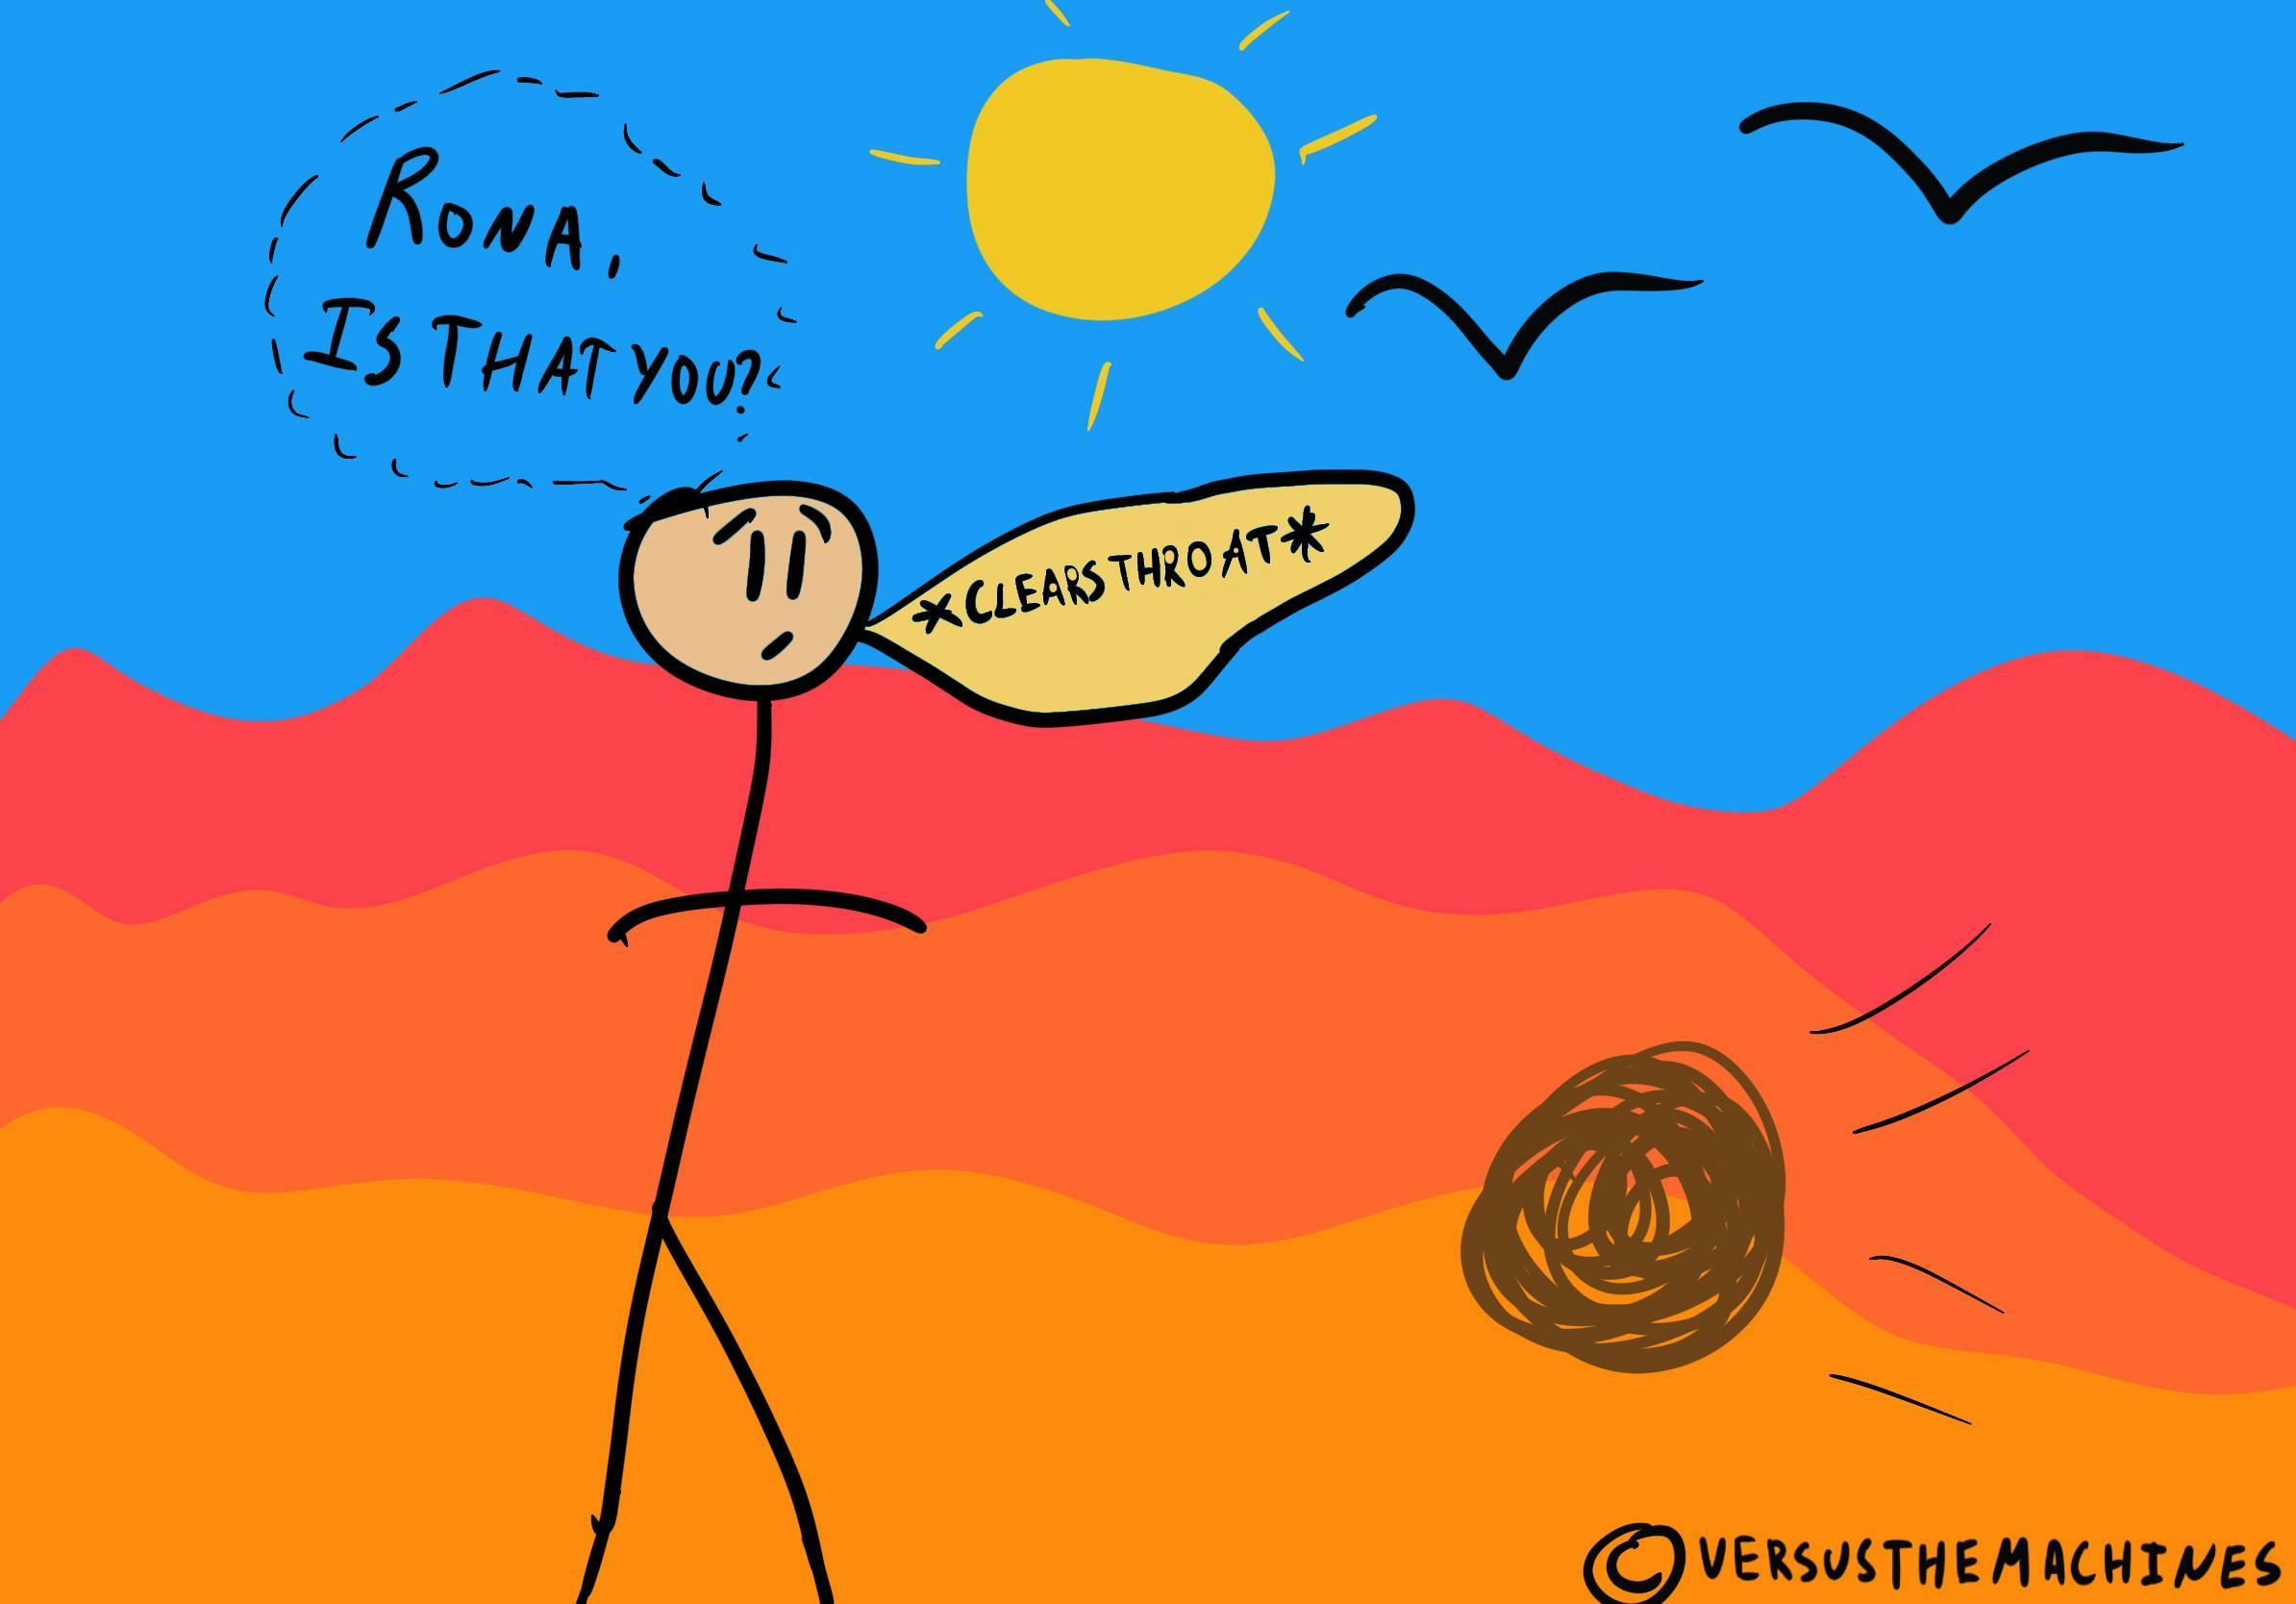 Stick figure clears throat next to rolling tumbleweed in a desert with a sun and birds. Text: "Rona, IS THAT YOU?" and "*CLEARS THROAT*". "@VERSUSTHEMACHINES" in corner.